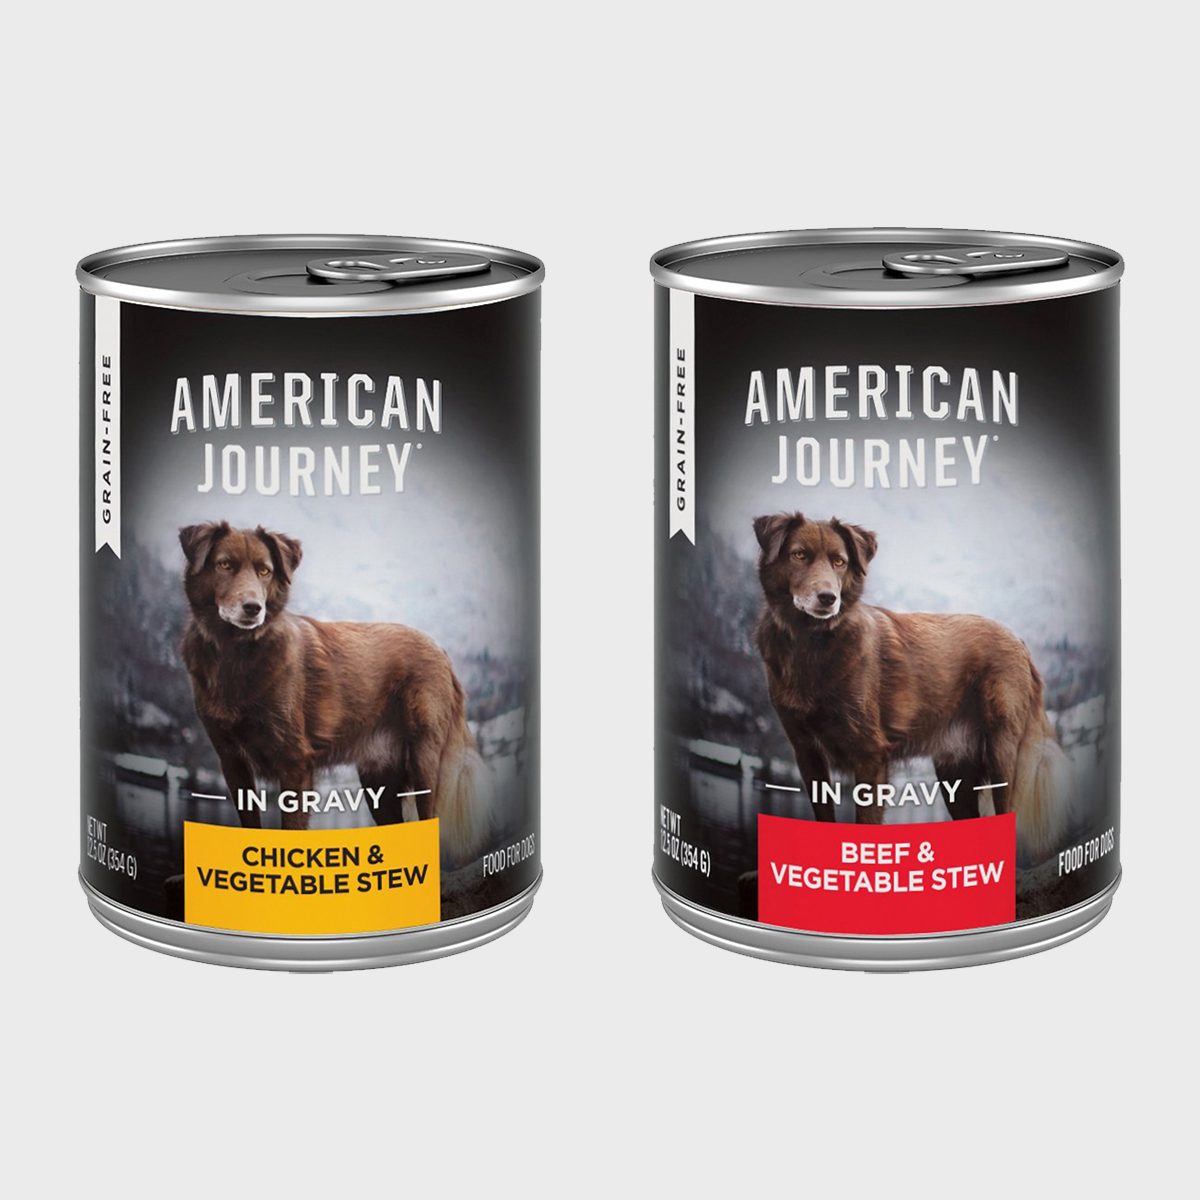 <p>When it comes to wet food, you should look for one with several sources of lean animal protein and real meat ingredients, such as beef, lamb, and venison, says James Fuller, founder of the pet nutrition site HonestWhiskers.com. The best large breed dog food options, he explains, "have higher protein content to ensure muscle maintenance, as well as development." That's why he recommends this American Journey formulation. "It also has whole-food ingredients that provide dense sources of vitamins, minerals, and antioxidants," he notes. "The organ meat significantly boosts vitamin A content, too." Combined, these qualities will give your pups tons of energy. For a special snack, you can also try making these simple <a href="https://www.rd.com/article/11-simple-homemade-dog-treats-your-dog-will-love/">homemade dog treats</a>.</p> <p><strong>Highlights:</strong></p> <ul> <li>Good for picky eaters</li> <li>Whole-food ingredients</li> <li>Balanced formula</li> </ul> <p class="listicle-page__cta-button-shop"><a class="shop-btn" href="https://www.chewy.com/american-journey-stews-poultry-beef/dp/160900">Shop Now</a></p>